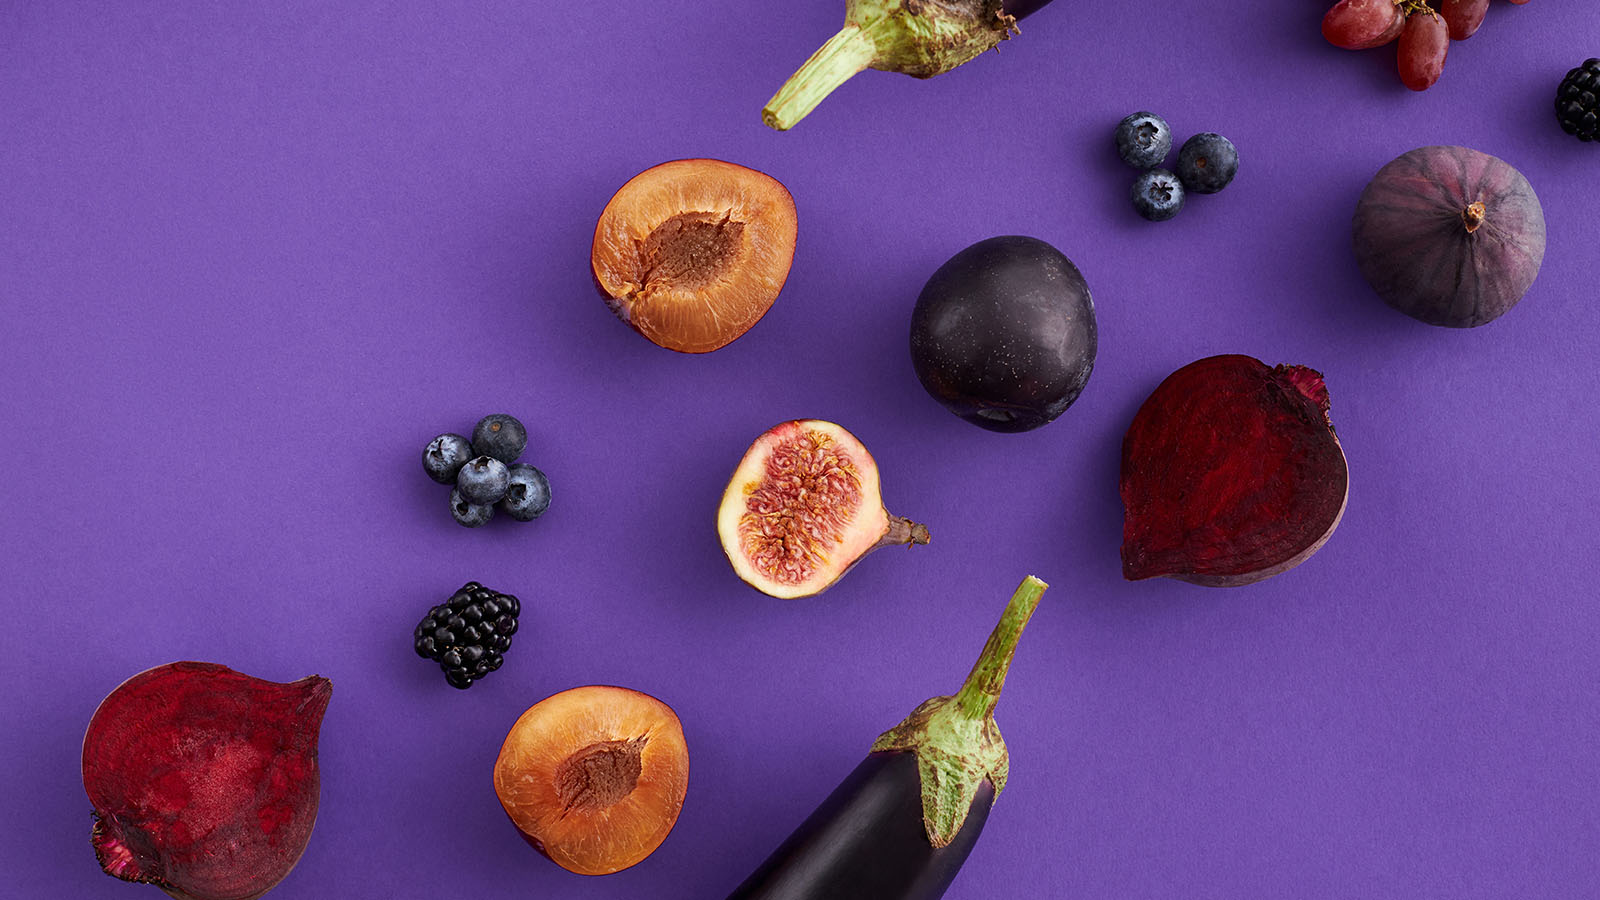 Close-Up Shot of Purple Fruits and Vegetables on a Purple Surface